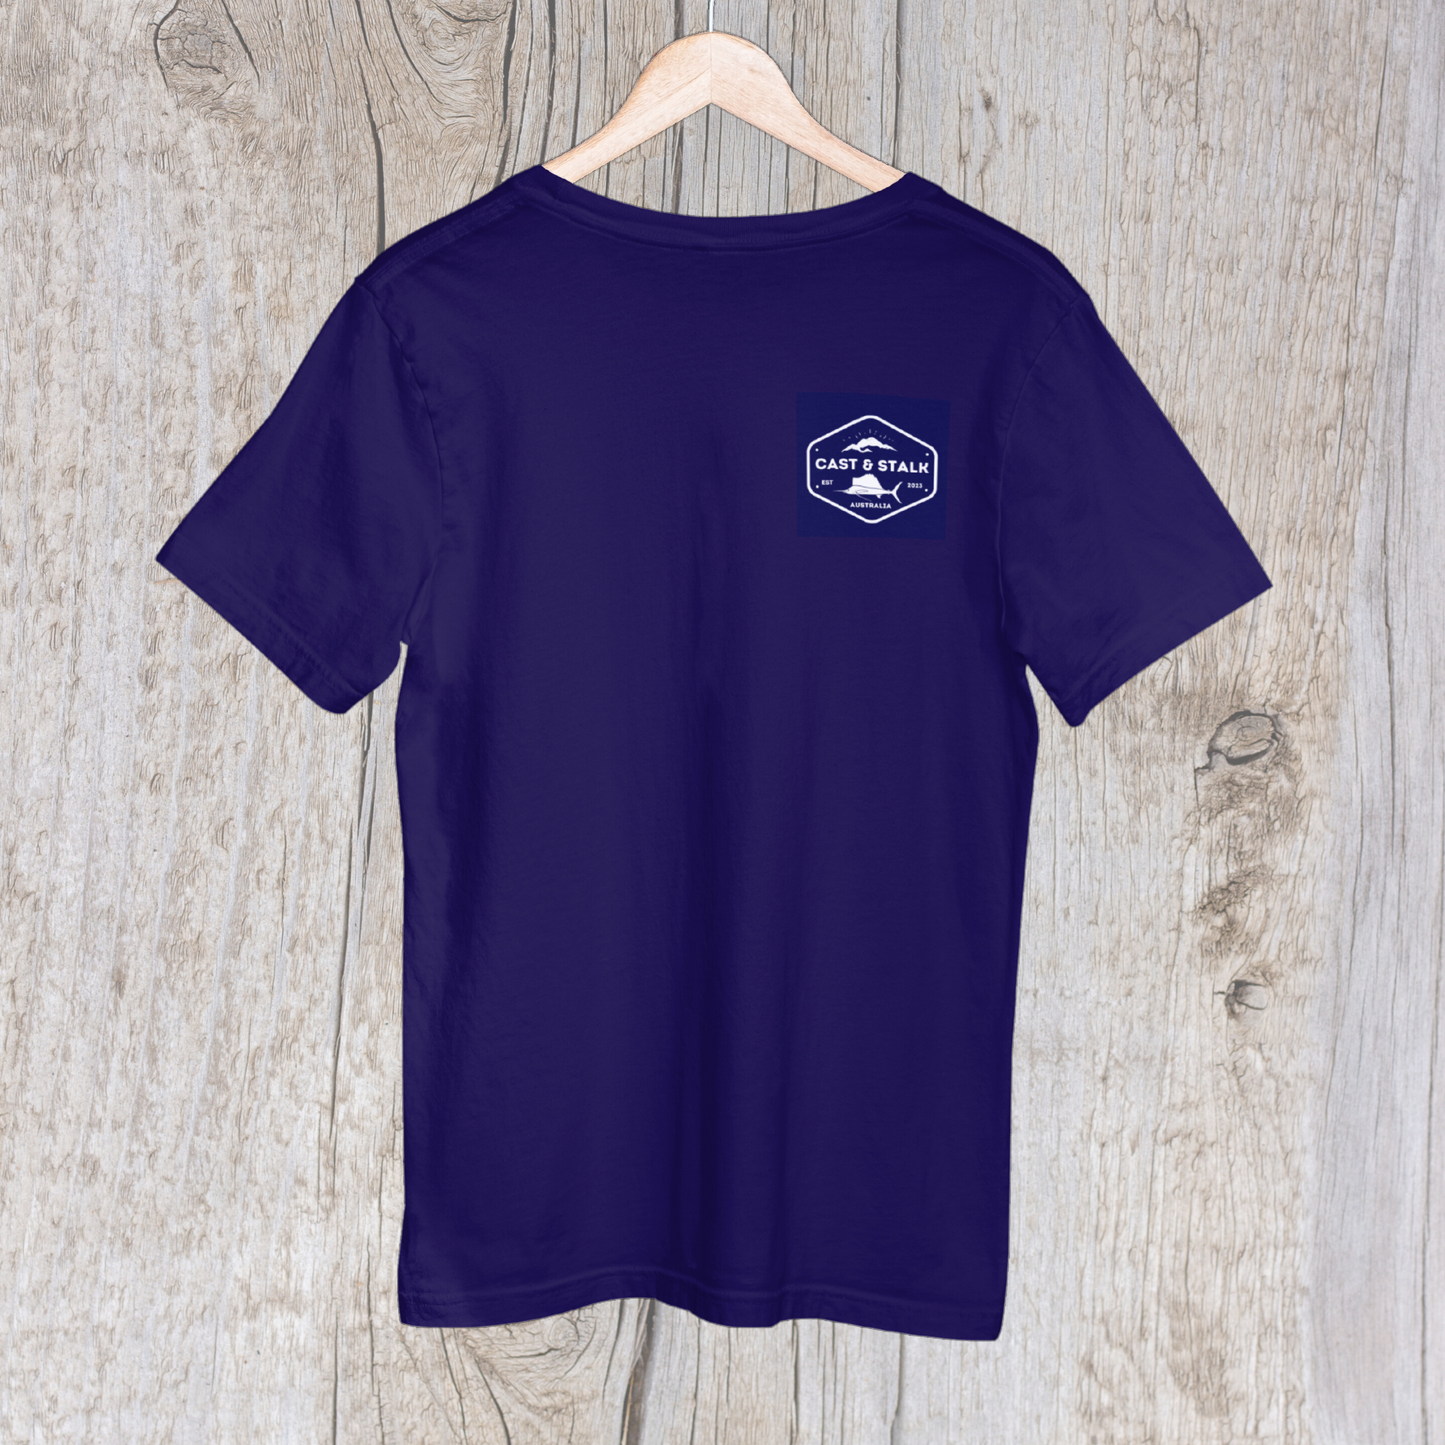 Cast and stalk t-shirt navy blue